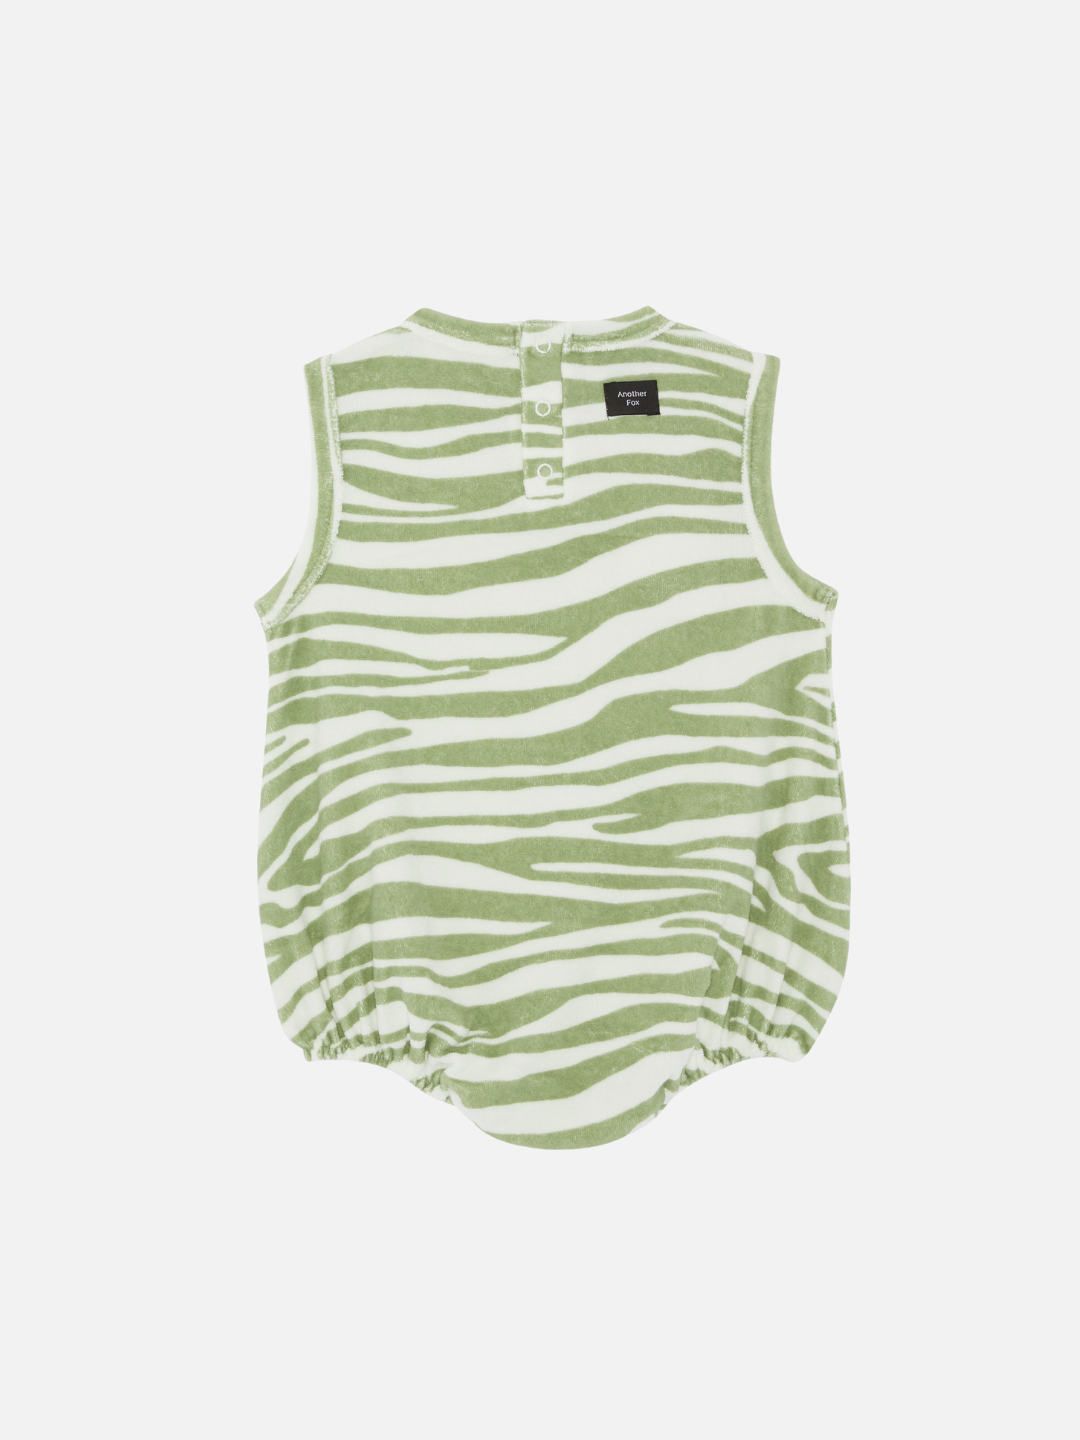 Tiger | Back view of the baby Terry bubble bodysuit in green Tiger print